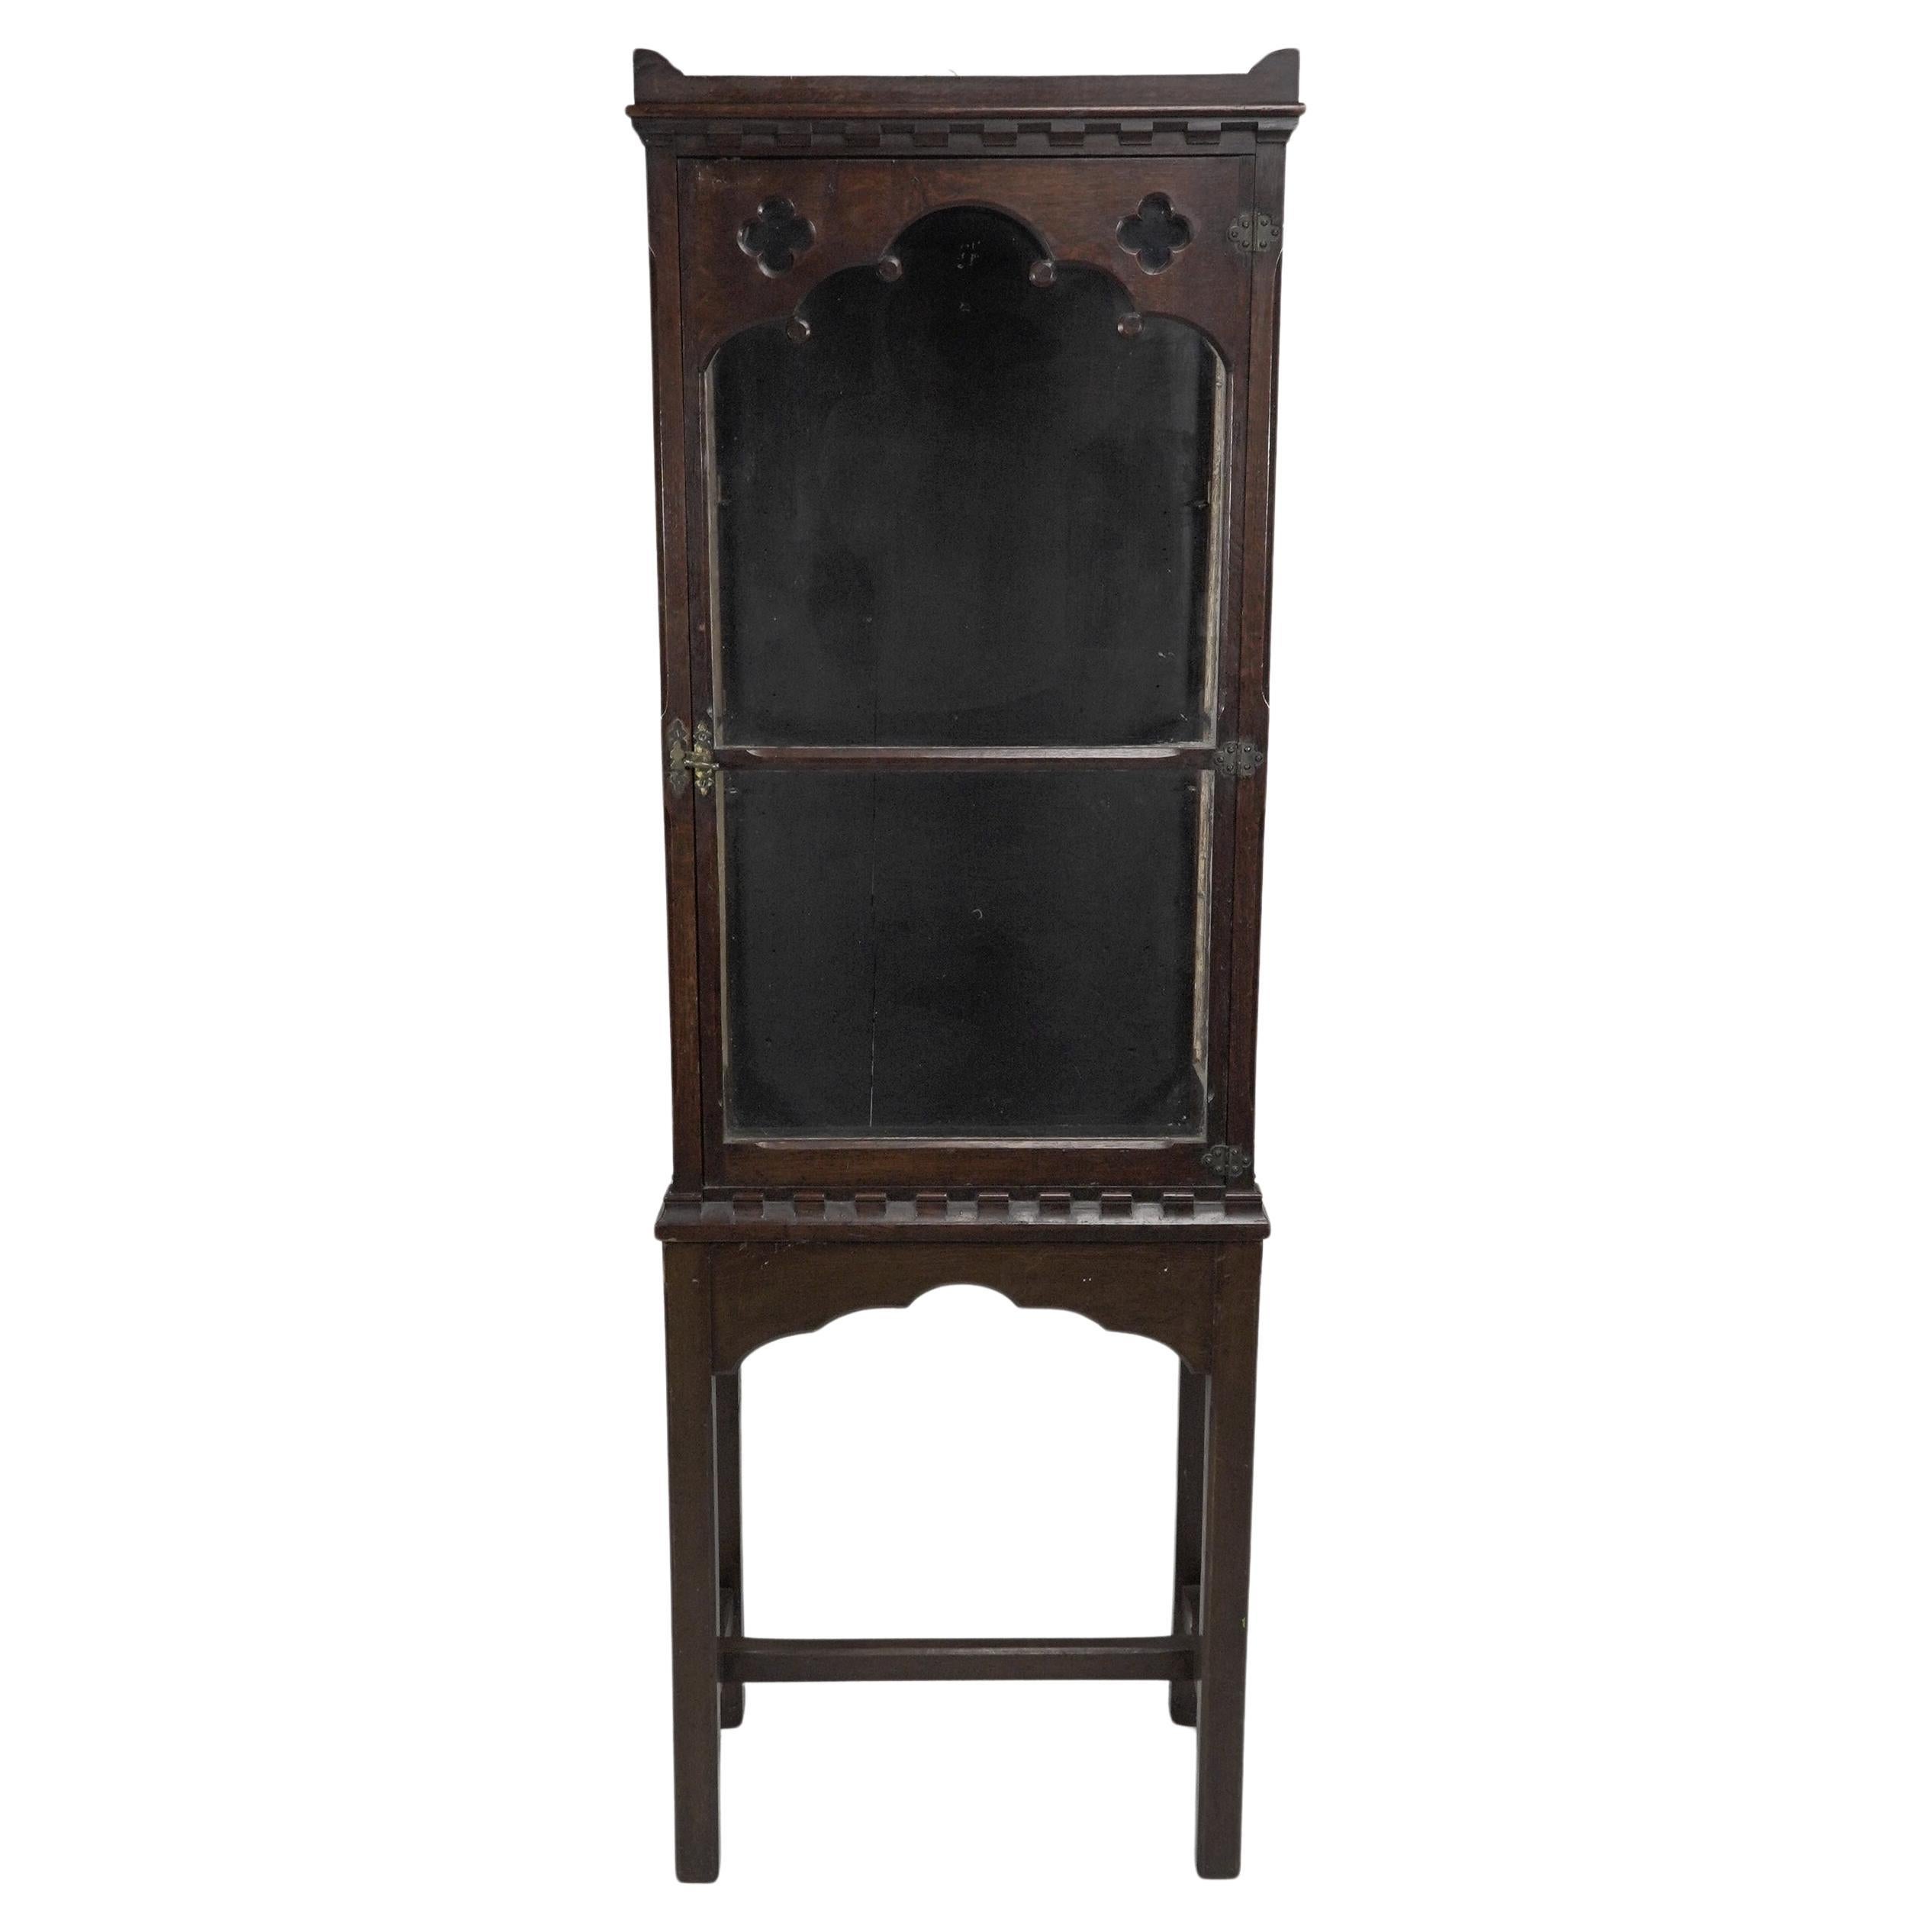 Gothic Revival oak display cabinet with arch & quatrefoil decoration on a stand.